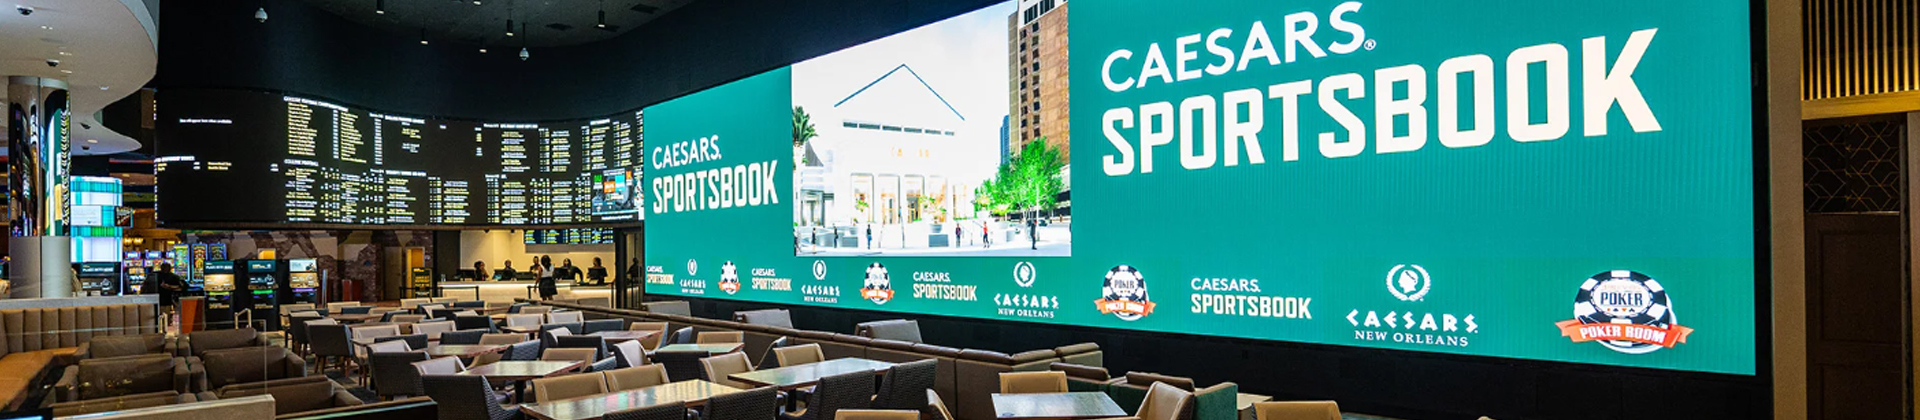 ﻿Caesars Sportsbook Expands with New Mississippi App Launch